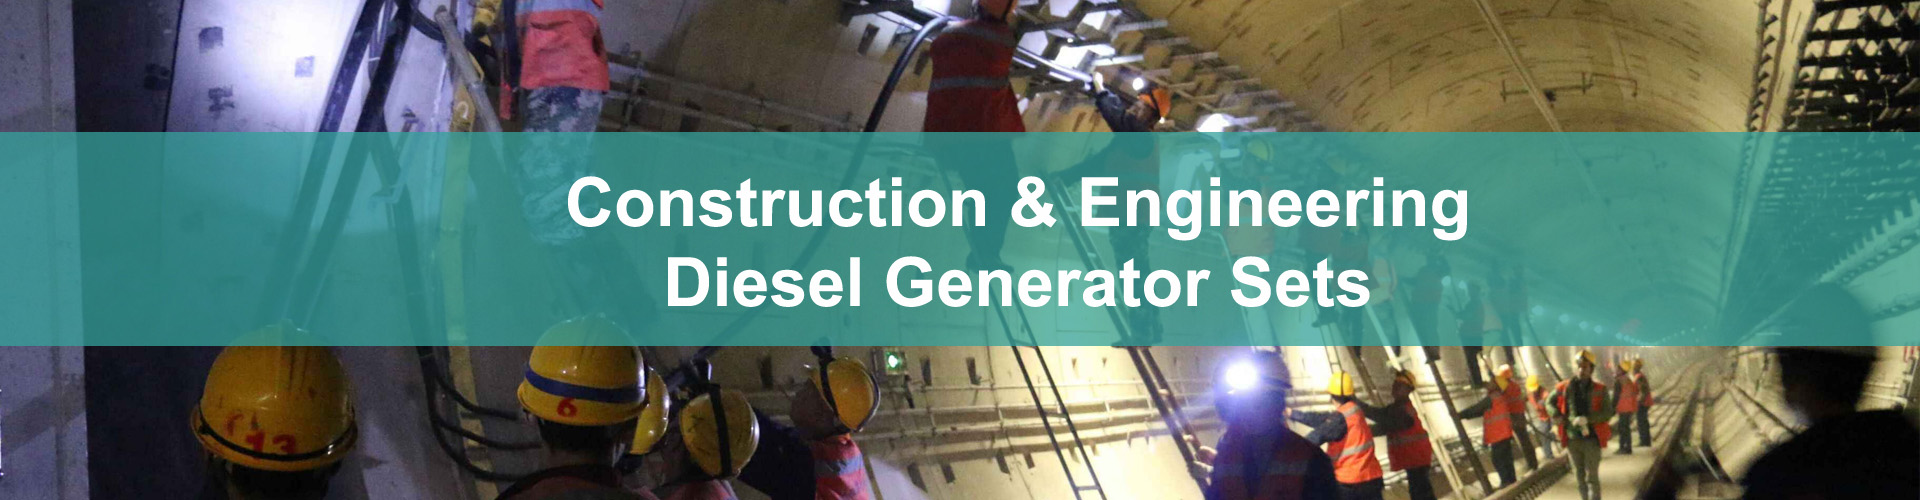 Construction and engineer appplication of diesel generator setImage